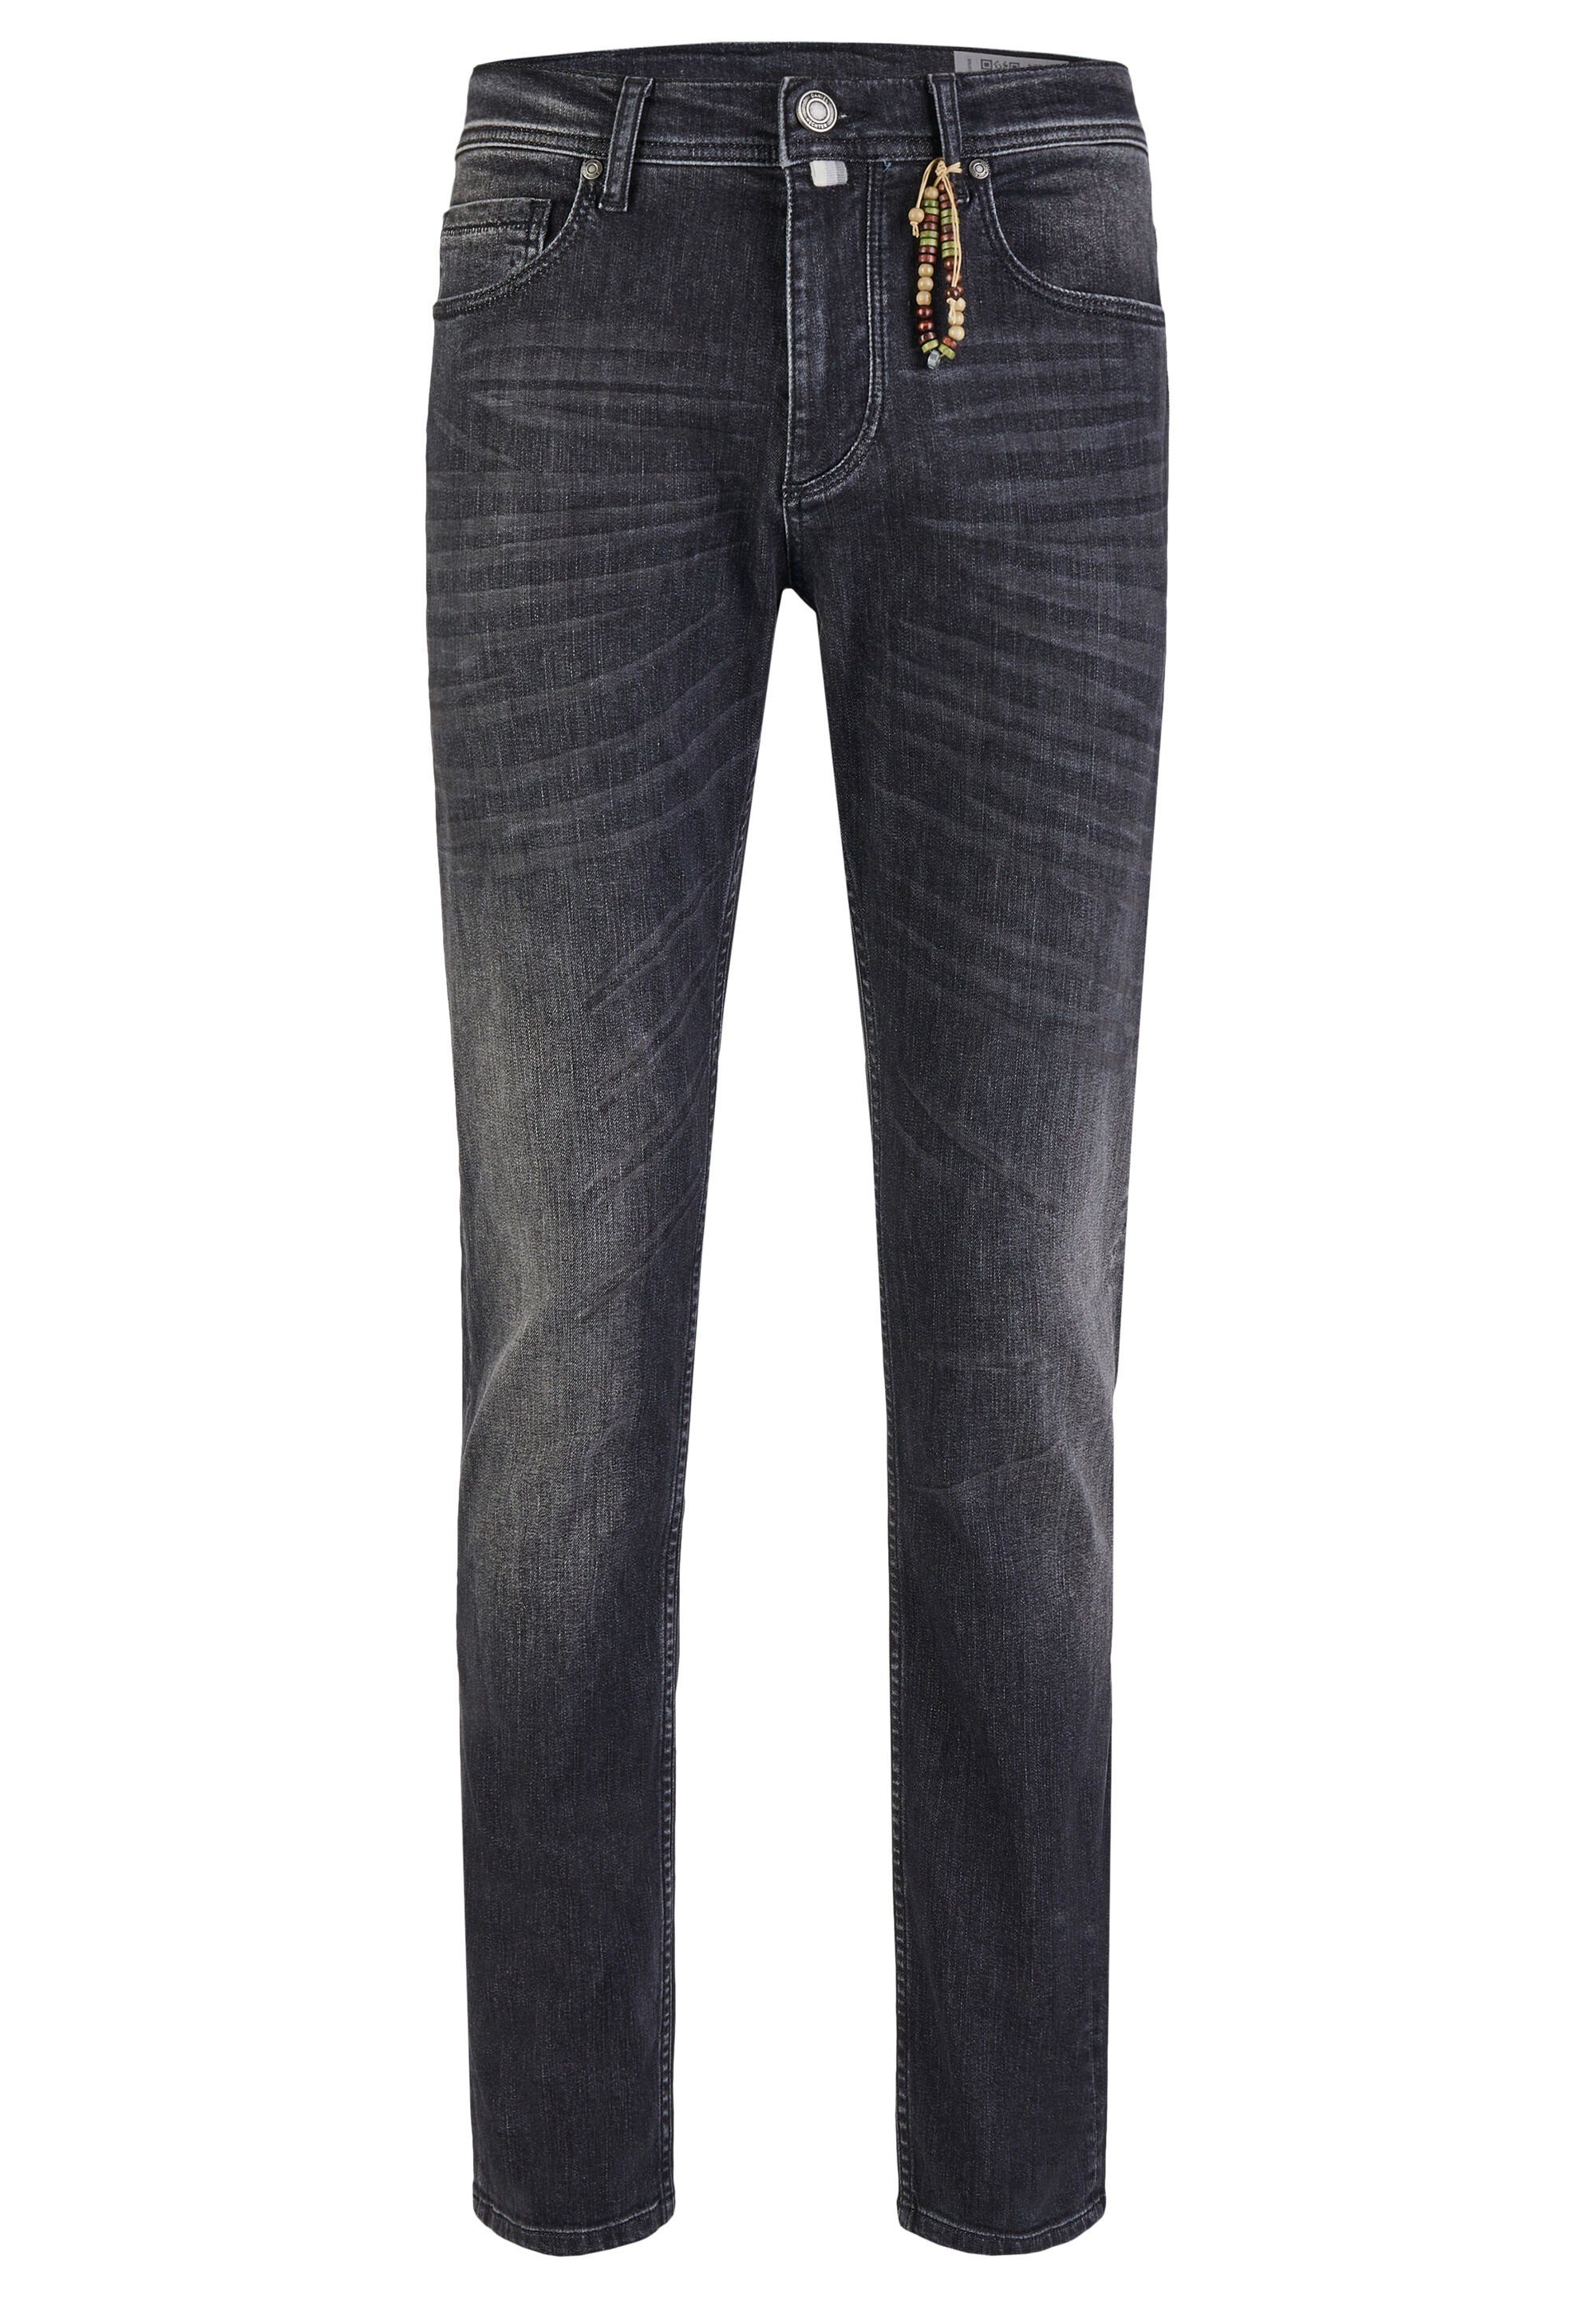 HECHTER PARIS Straight-Jeans 5-Pocket-Style | Straight-Fit Jeans